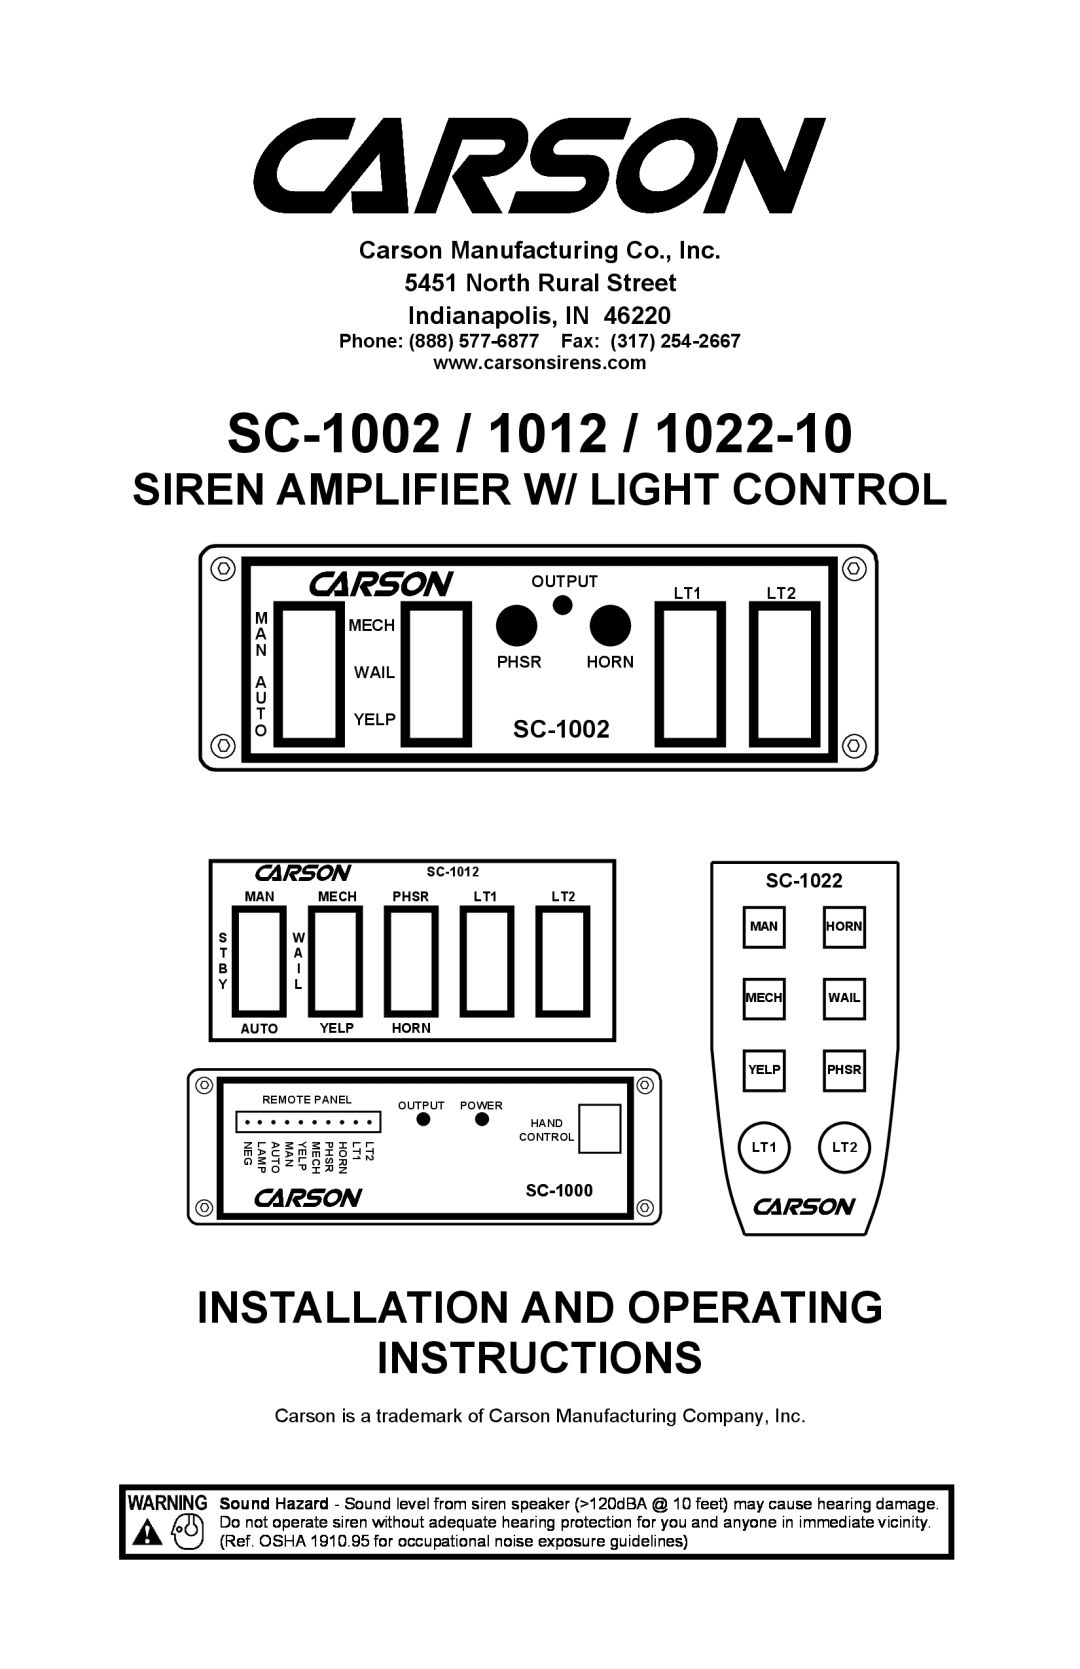 Carson 1022-10 14 V manual Technical Bulletin, INSTALLATION AND OPERATING MANUAL SC-1002 / 1012 / 1022-10, Old Version 